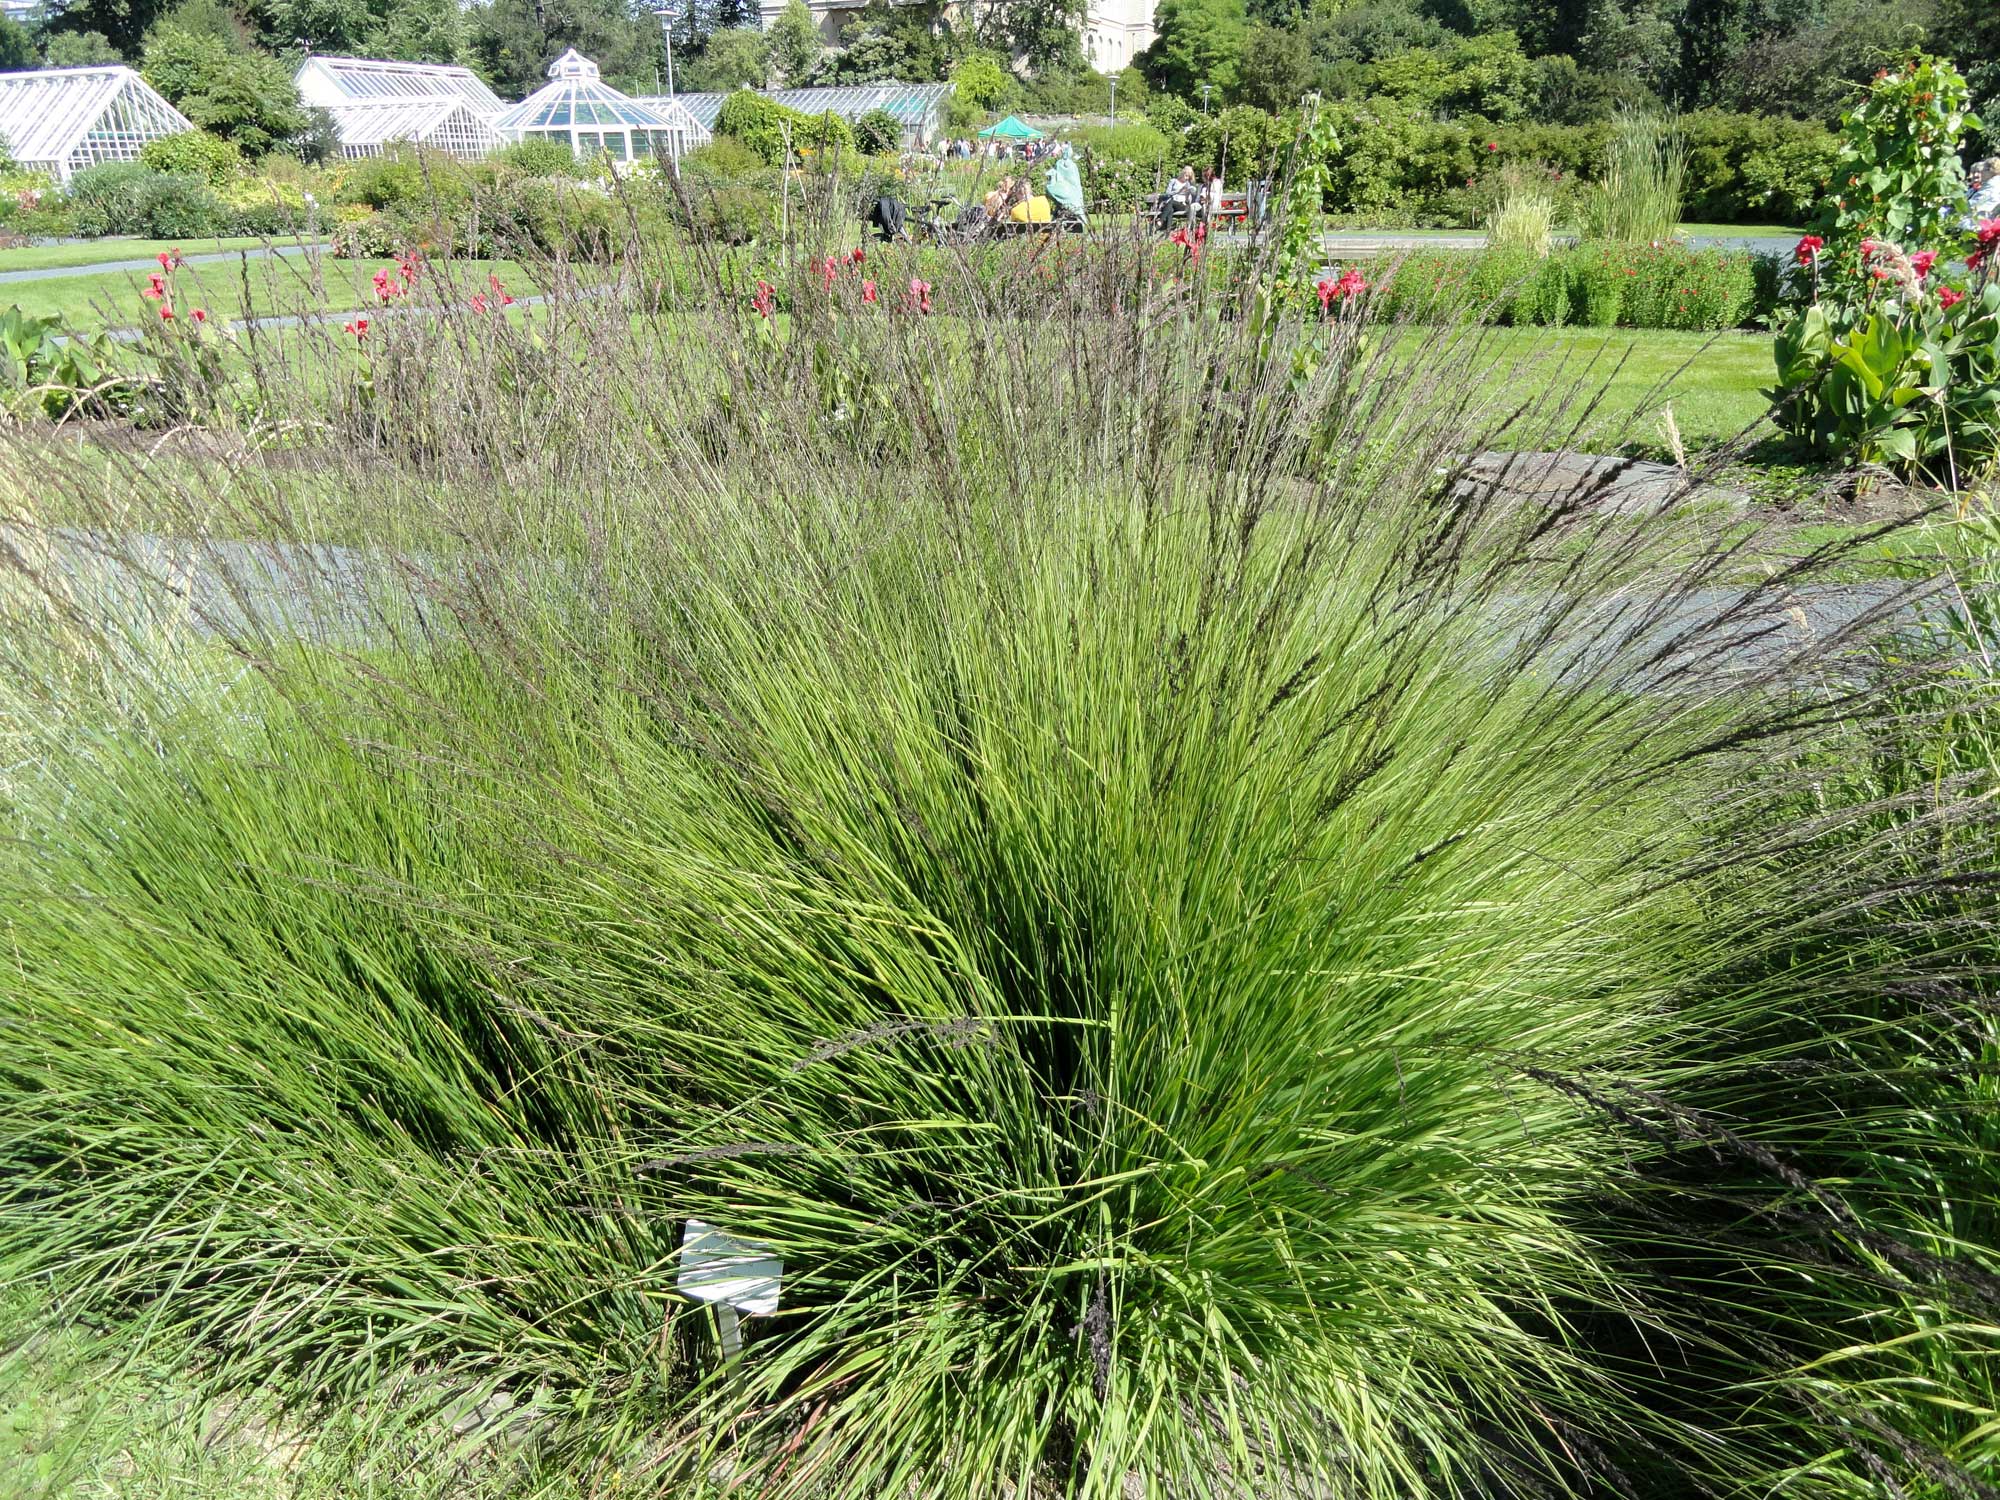 Photograph of purple moor grass growing a botanical garden. The photo shows two groups of long grasses and inflorescences. The inflorescences appear purpulish.